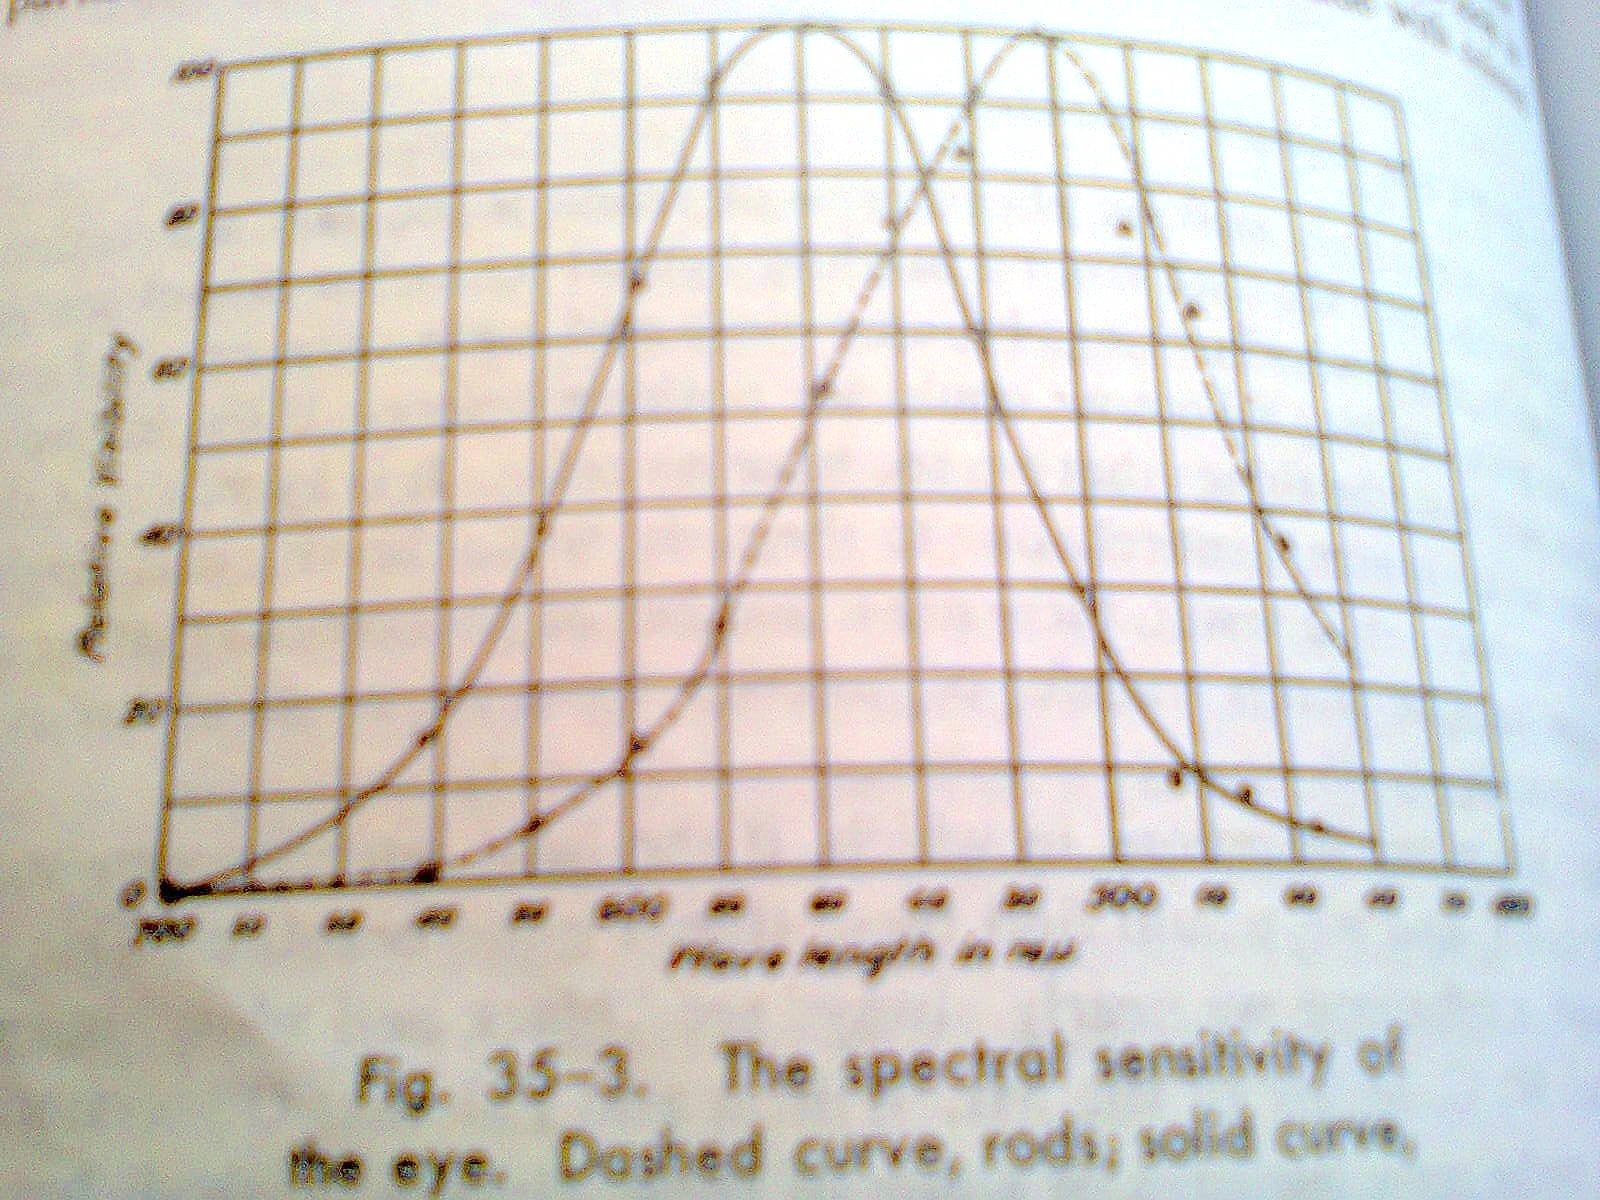 the spectral sensitivity of the eye.Dashed curve,rods;solid curve,cones